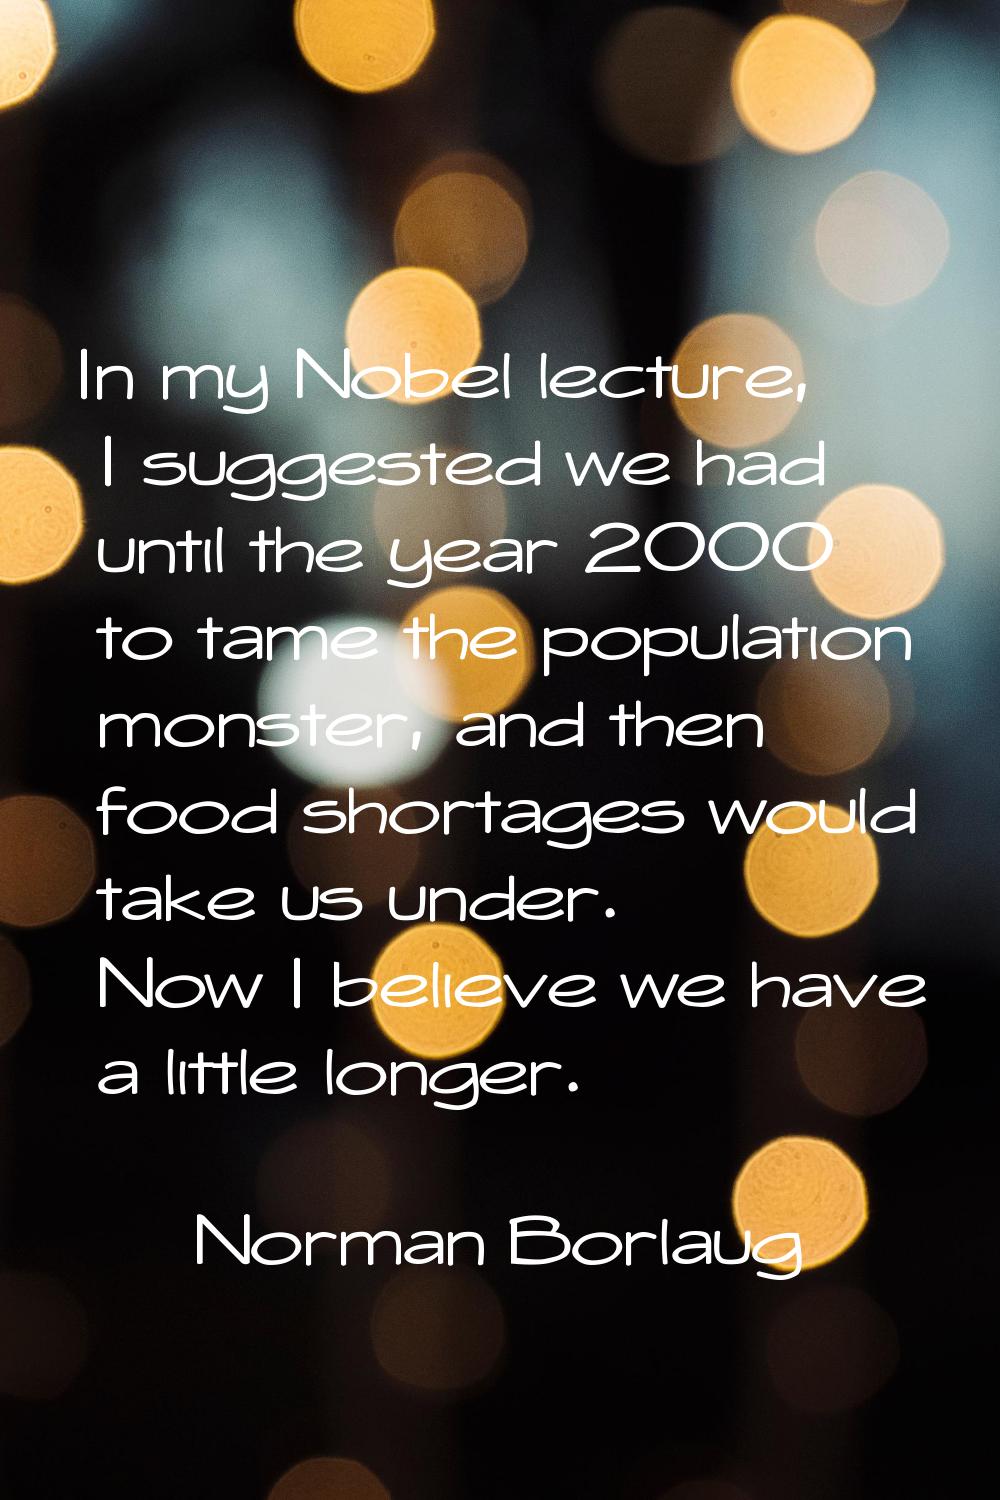 In my Nobel lecture, I suggested we had until the year 2000 to tame the population monster, and the